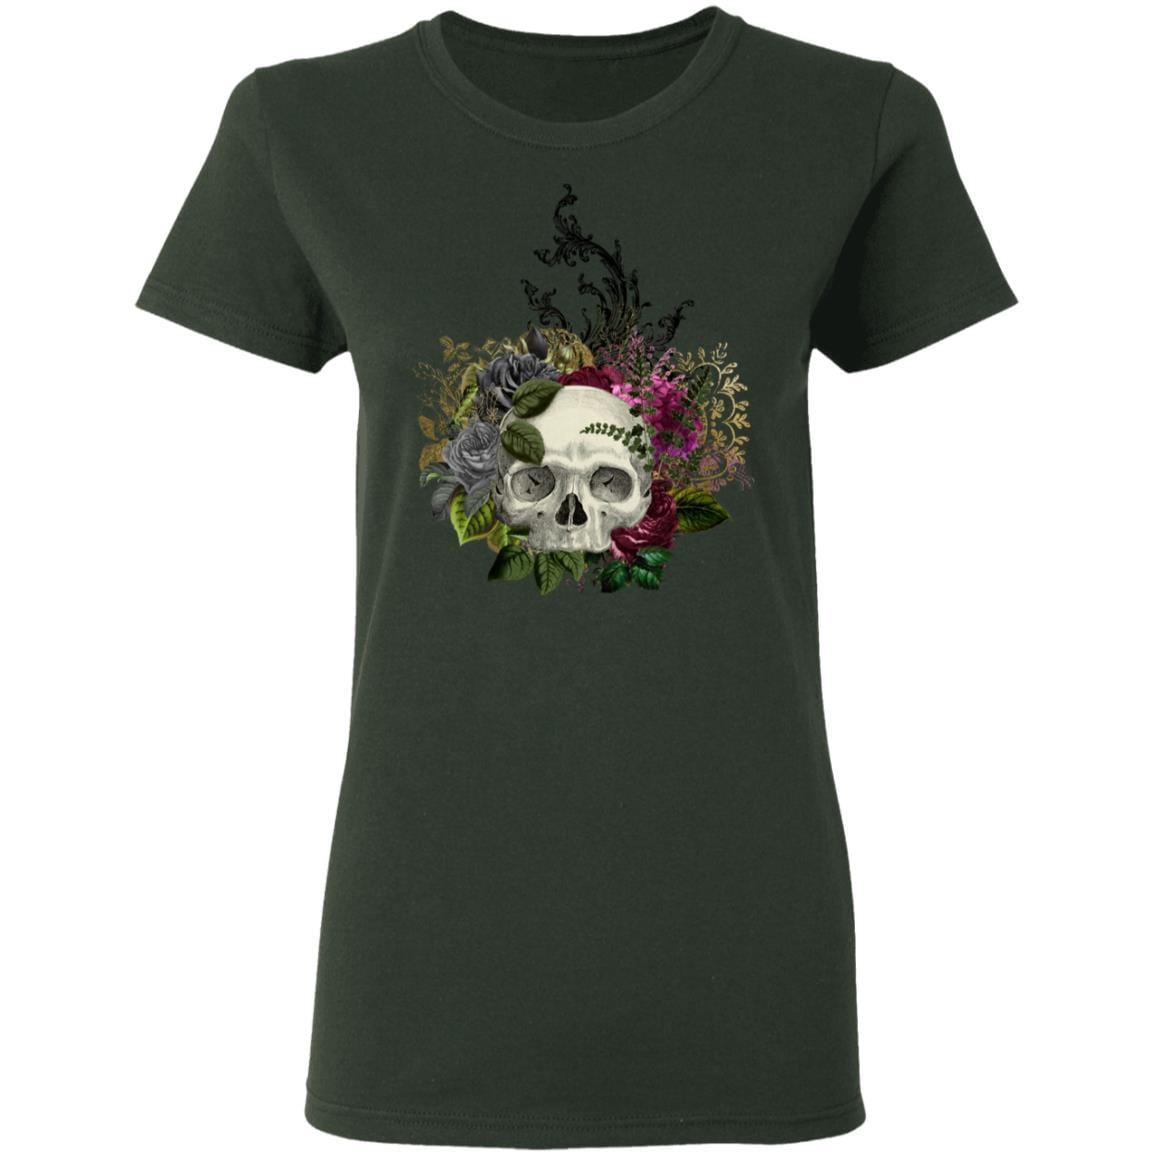 T-Shirts Forest Green / S Winey Bitches Co Skull Design #1 Ladies' 5.3 oz. T-Shirt WineyBitchesCo